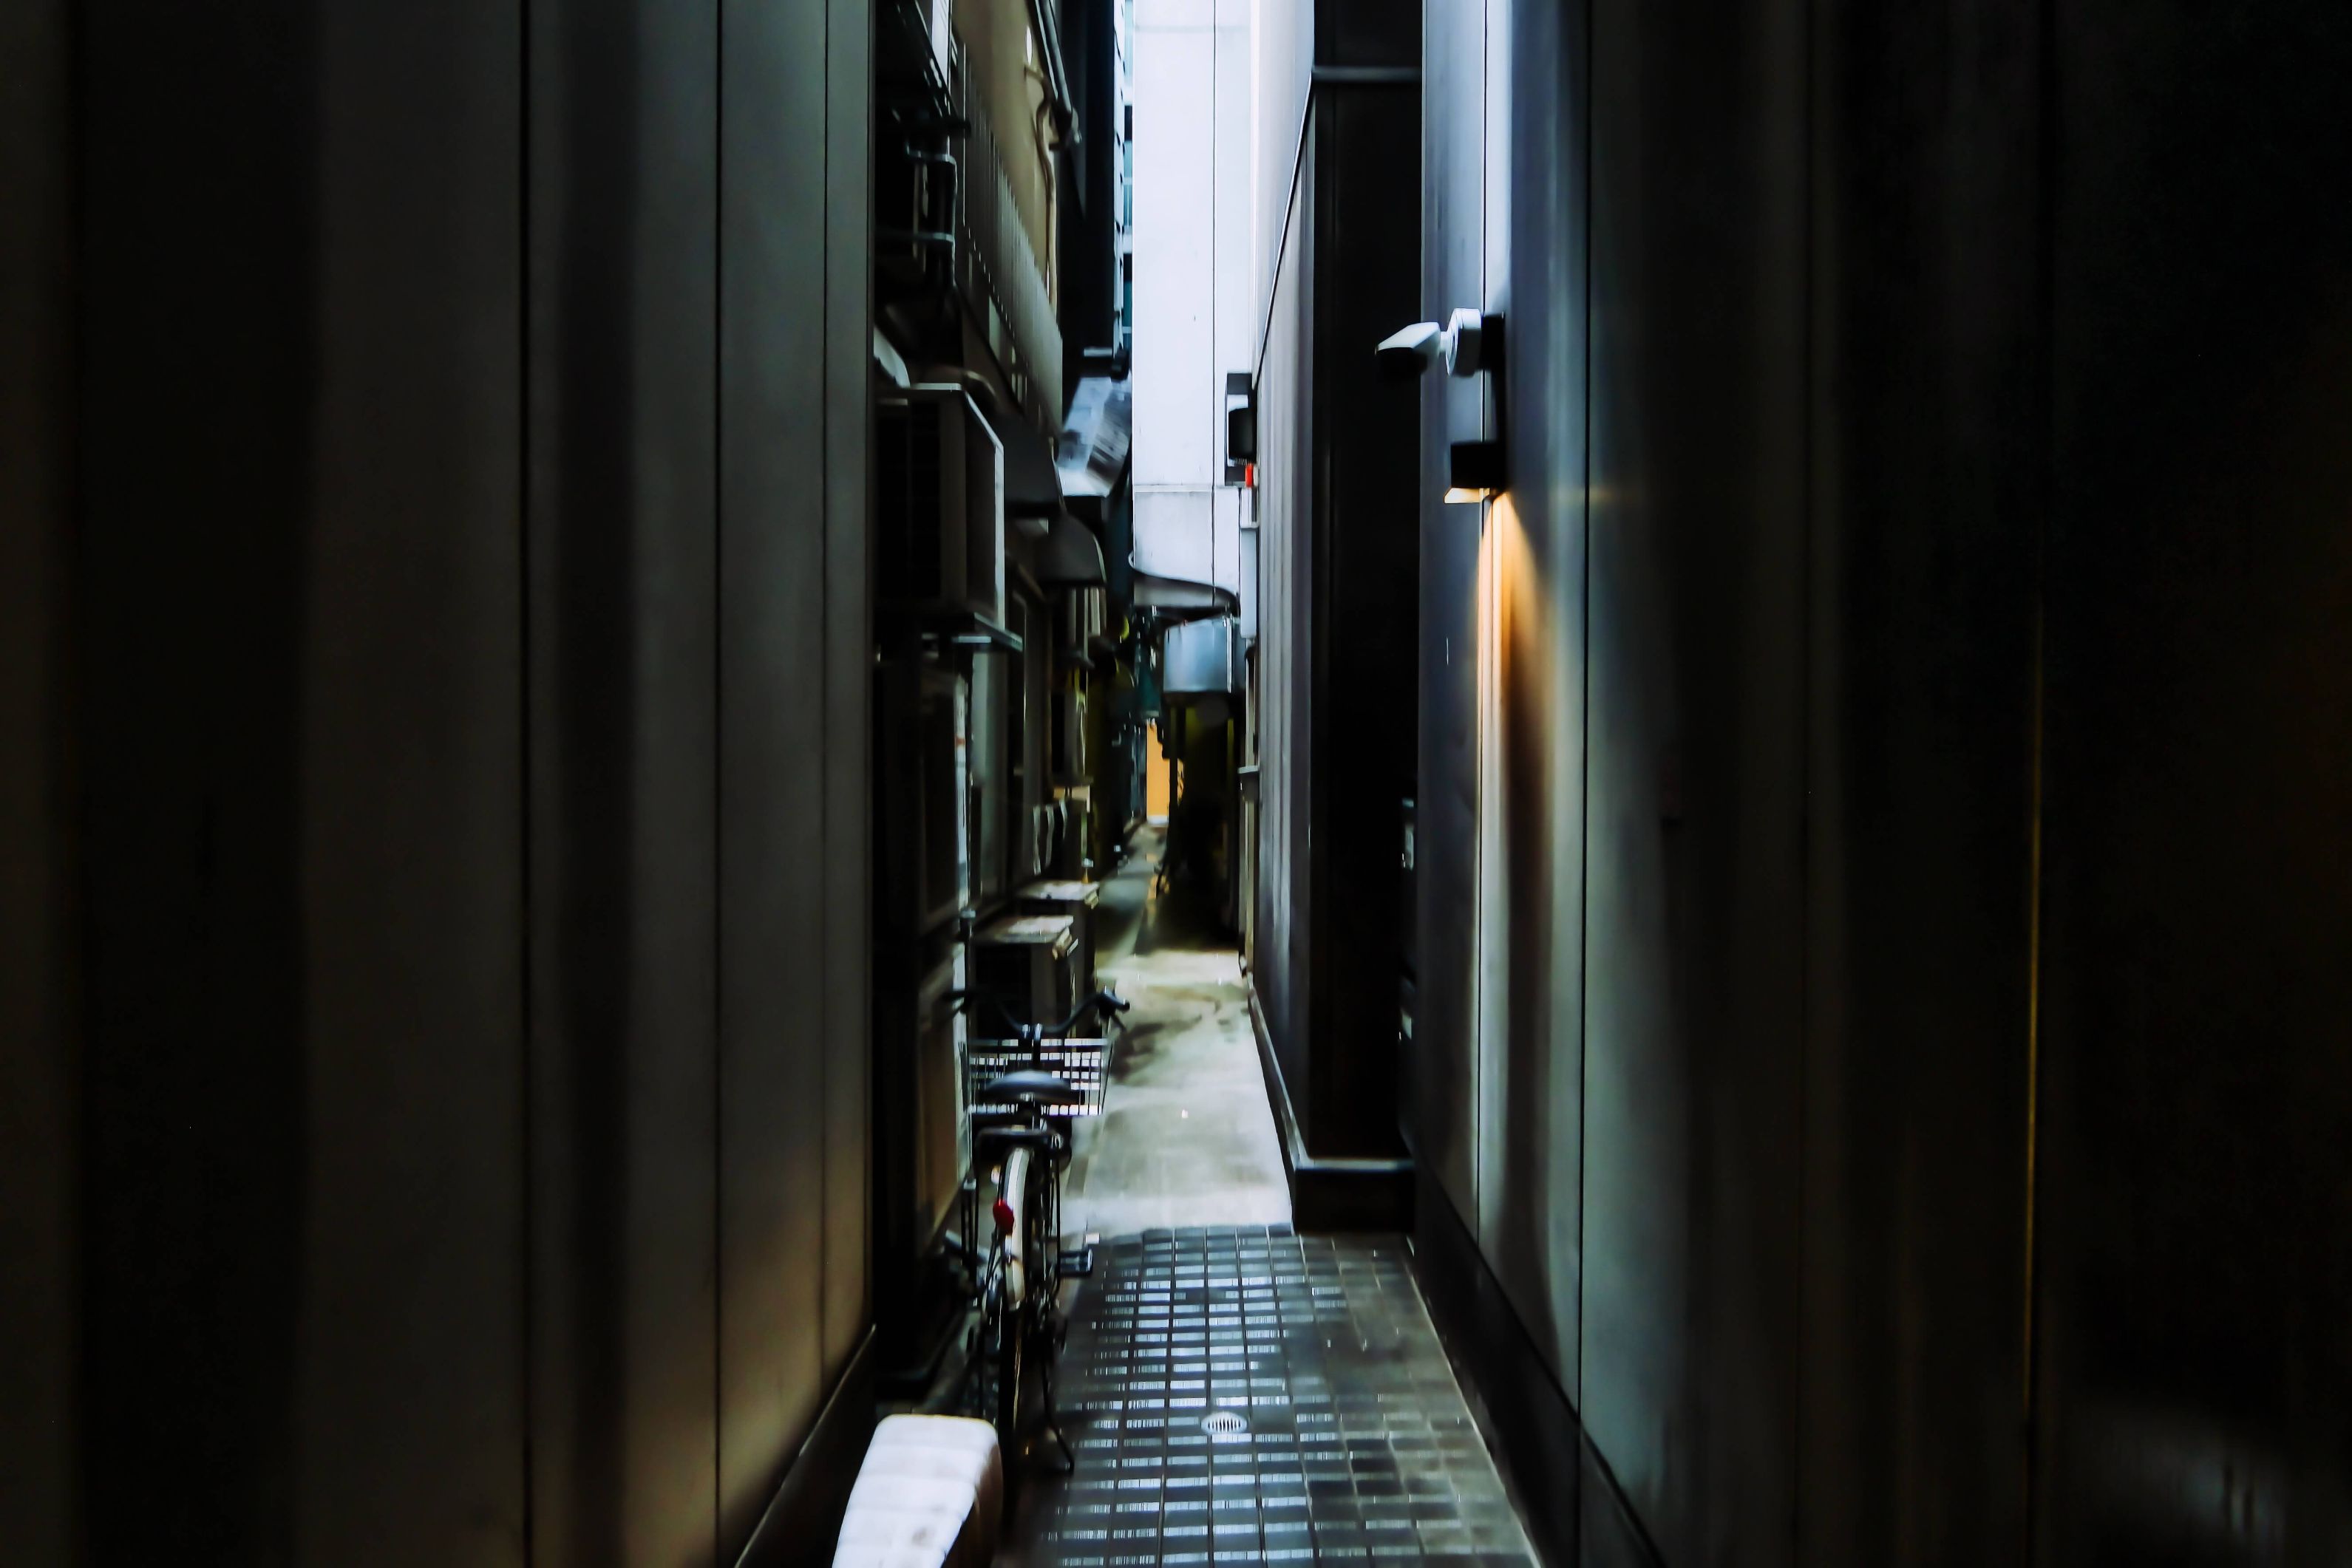 Walking past the pipes behind and between buildings. This spot is such a secret amongst Tokyo enthusiasts that many locals do not know about this shrine too.